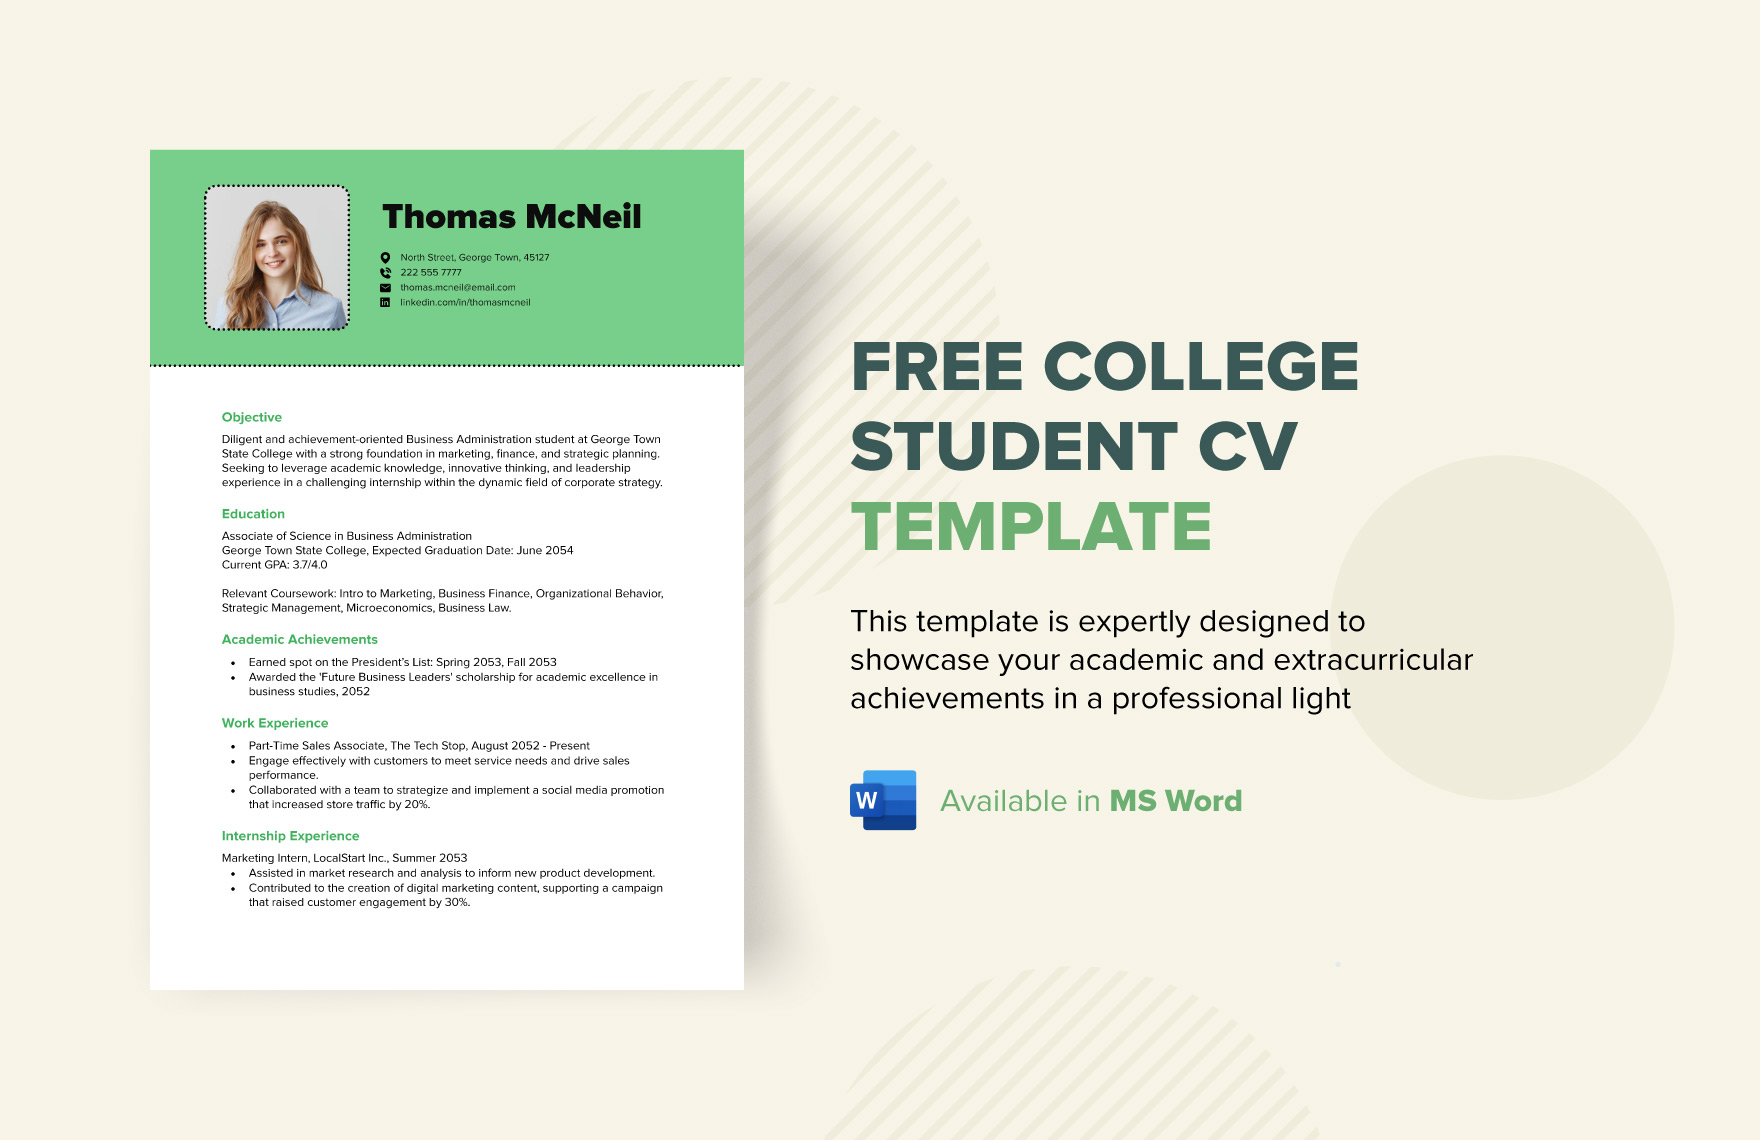 Free College Student CV Template